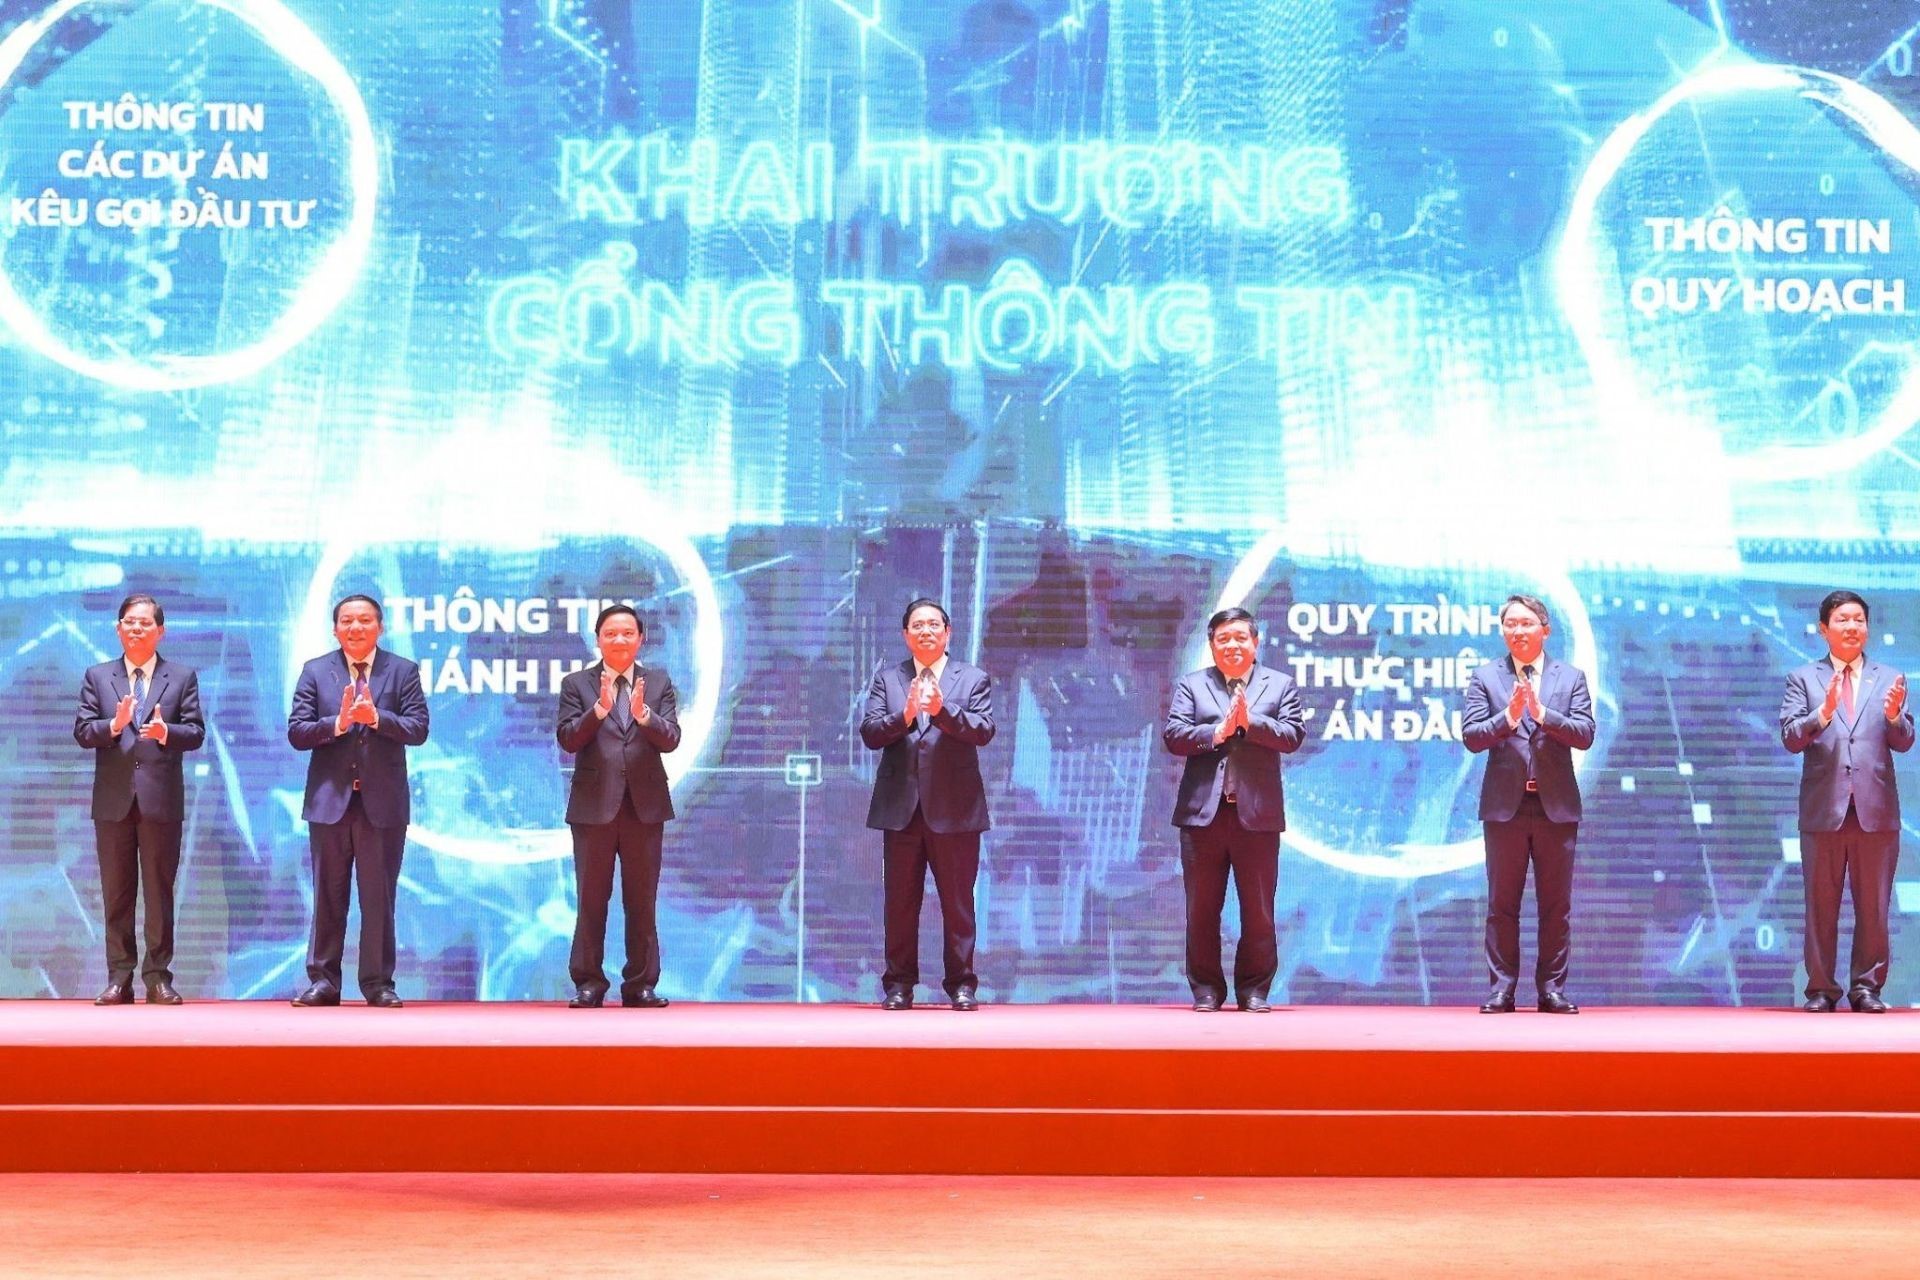 Prime Minister Pham Minh Chinh together with leaders of the Ministry, Khanh Hoa Provincial People's Committee, and FPT Corporation Chairman Truong Gia Binh (far right) performed the ceremony of pressing the button to open the Provincial Investment Promotion Portal.